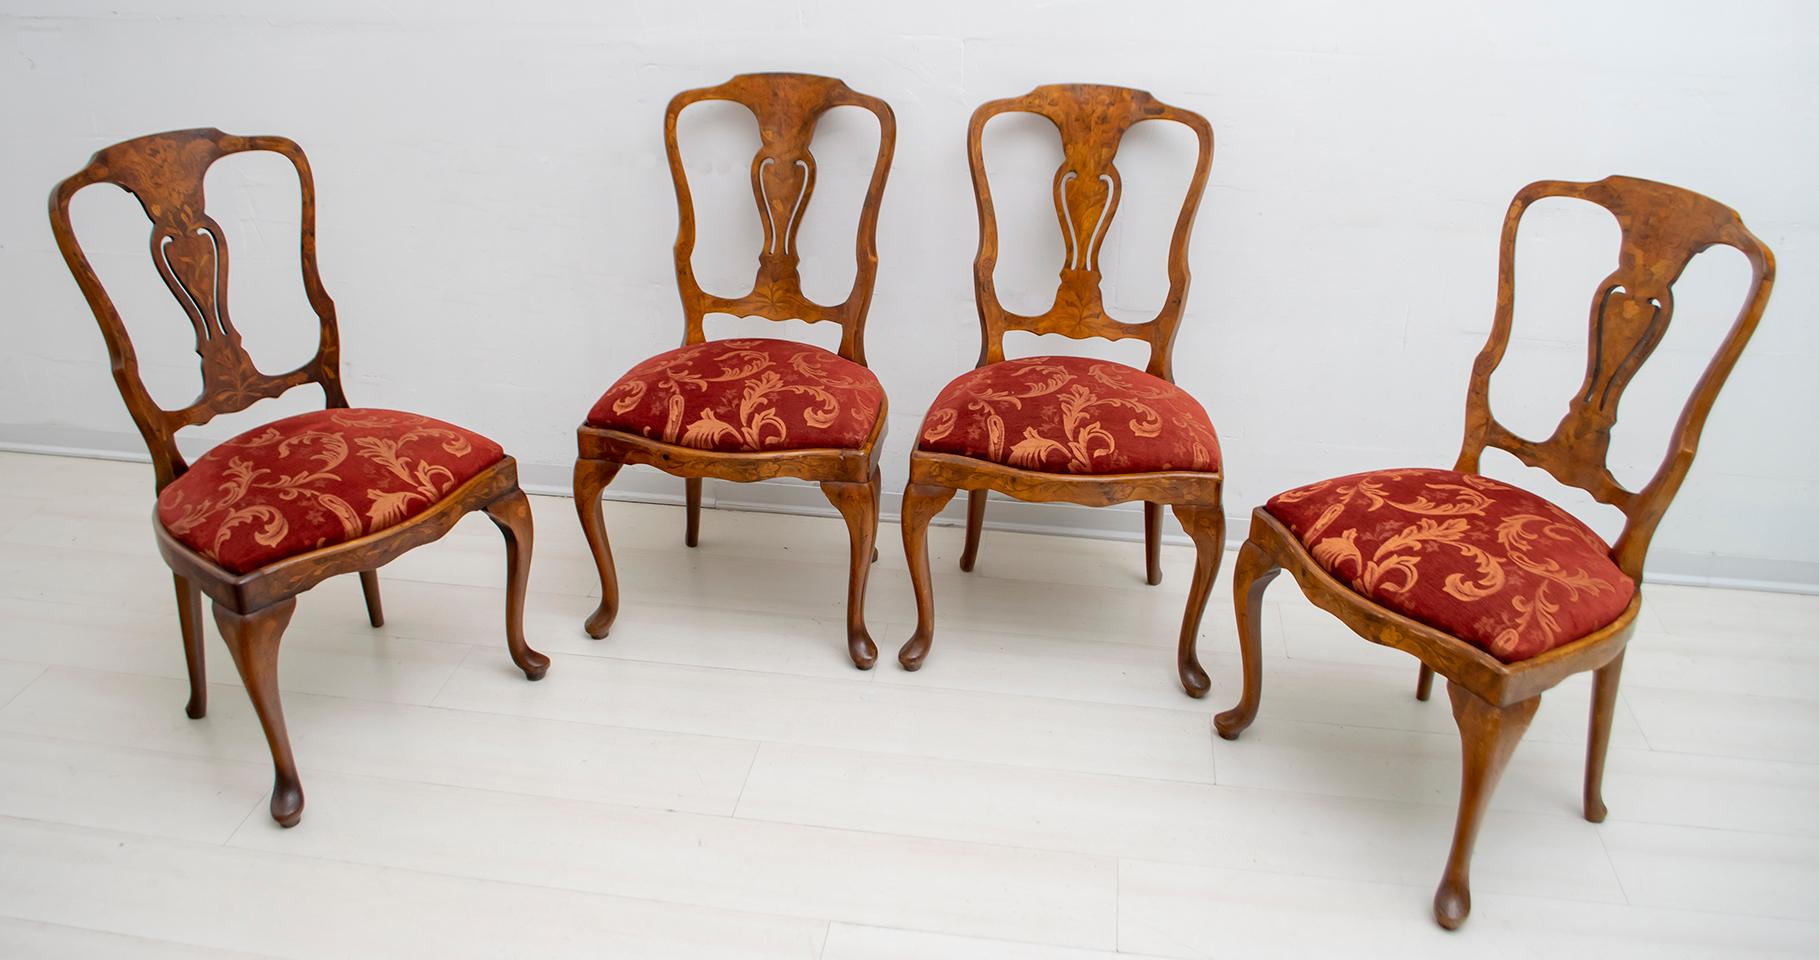 Dutch Colonial Walnut Dutch Chairs of the 20th Century with Maple Wood Inlays, Netherlands For Sale